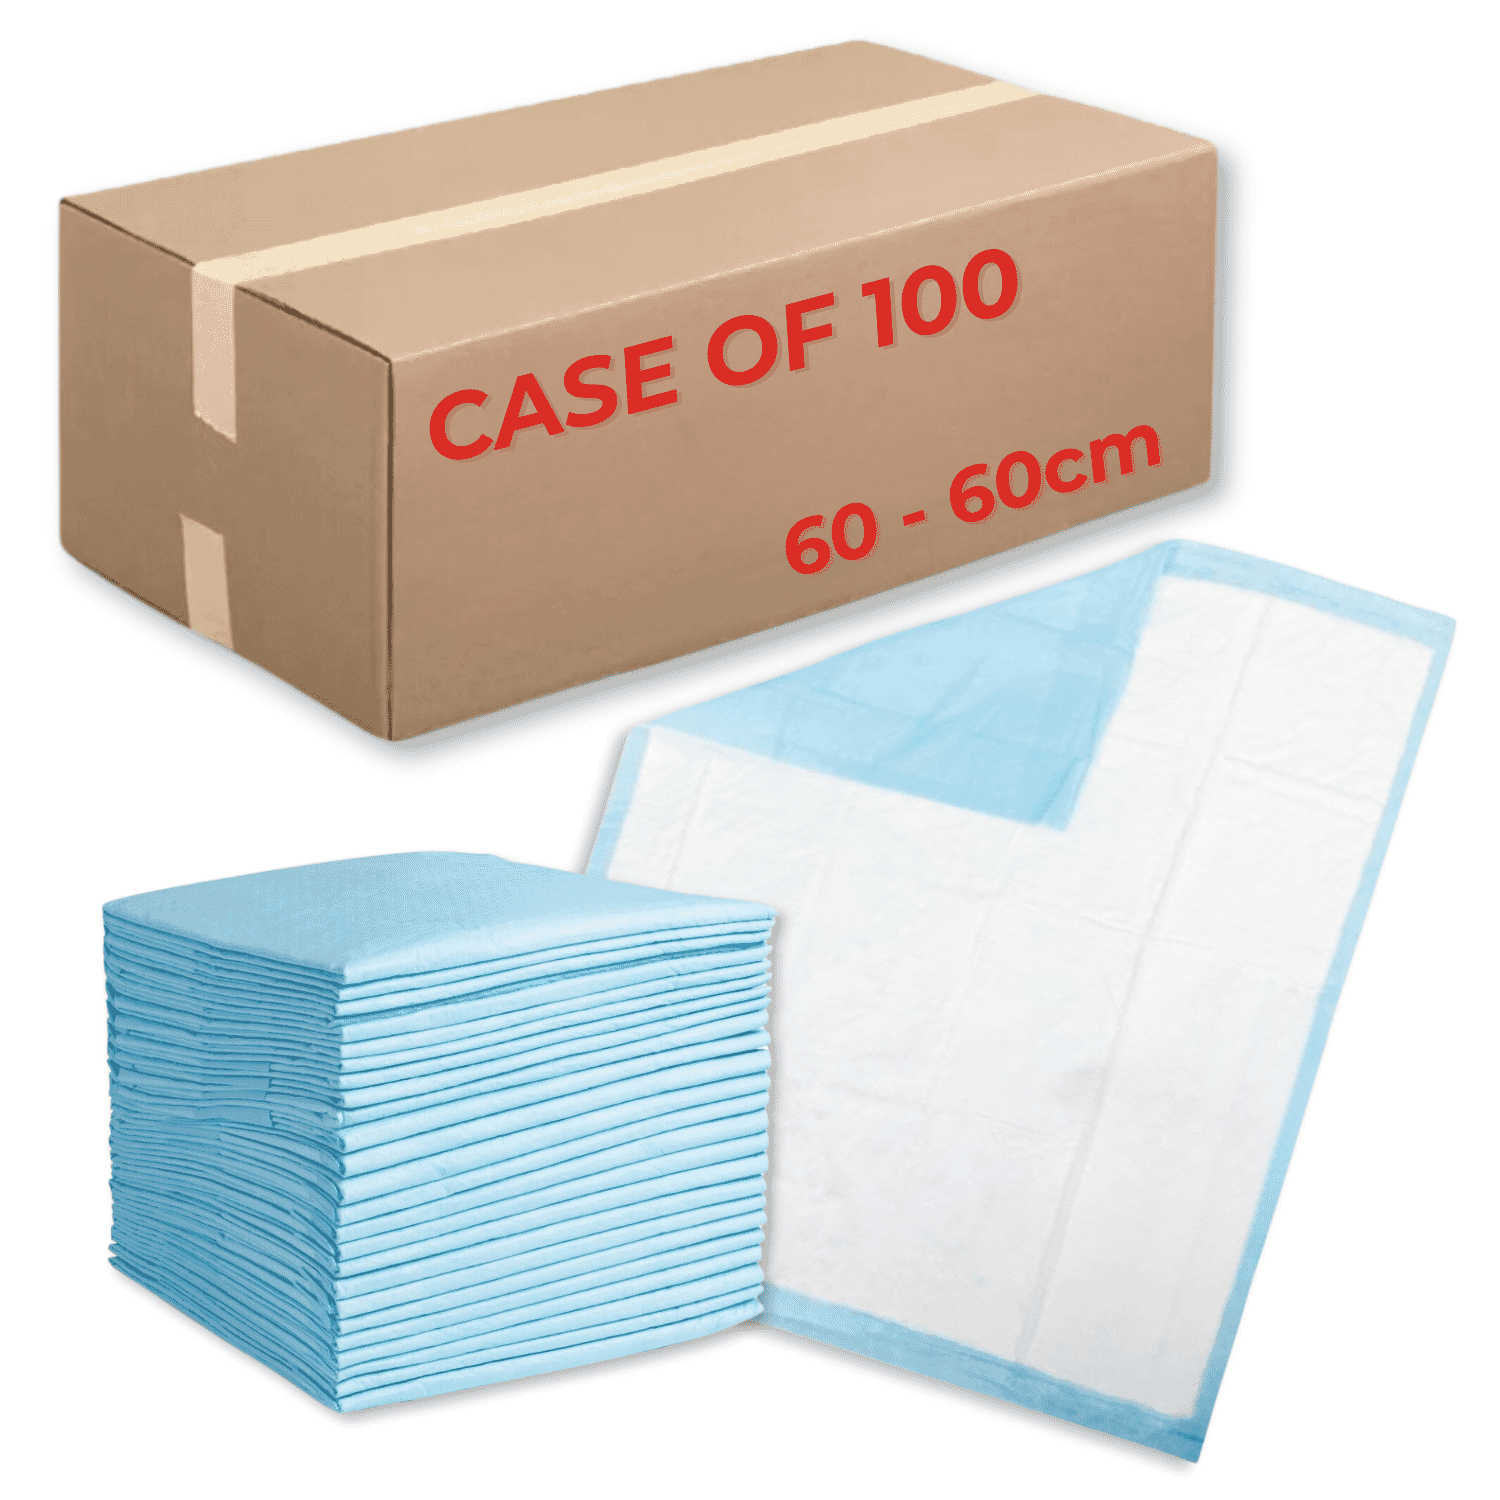 View Disposable Bed Pads 60cm x 60cm Case of 100 information